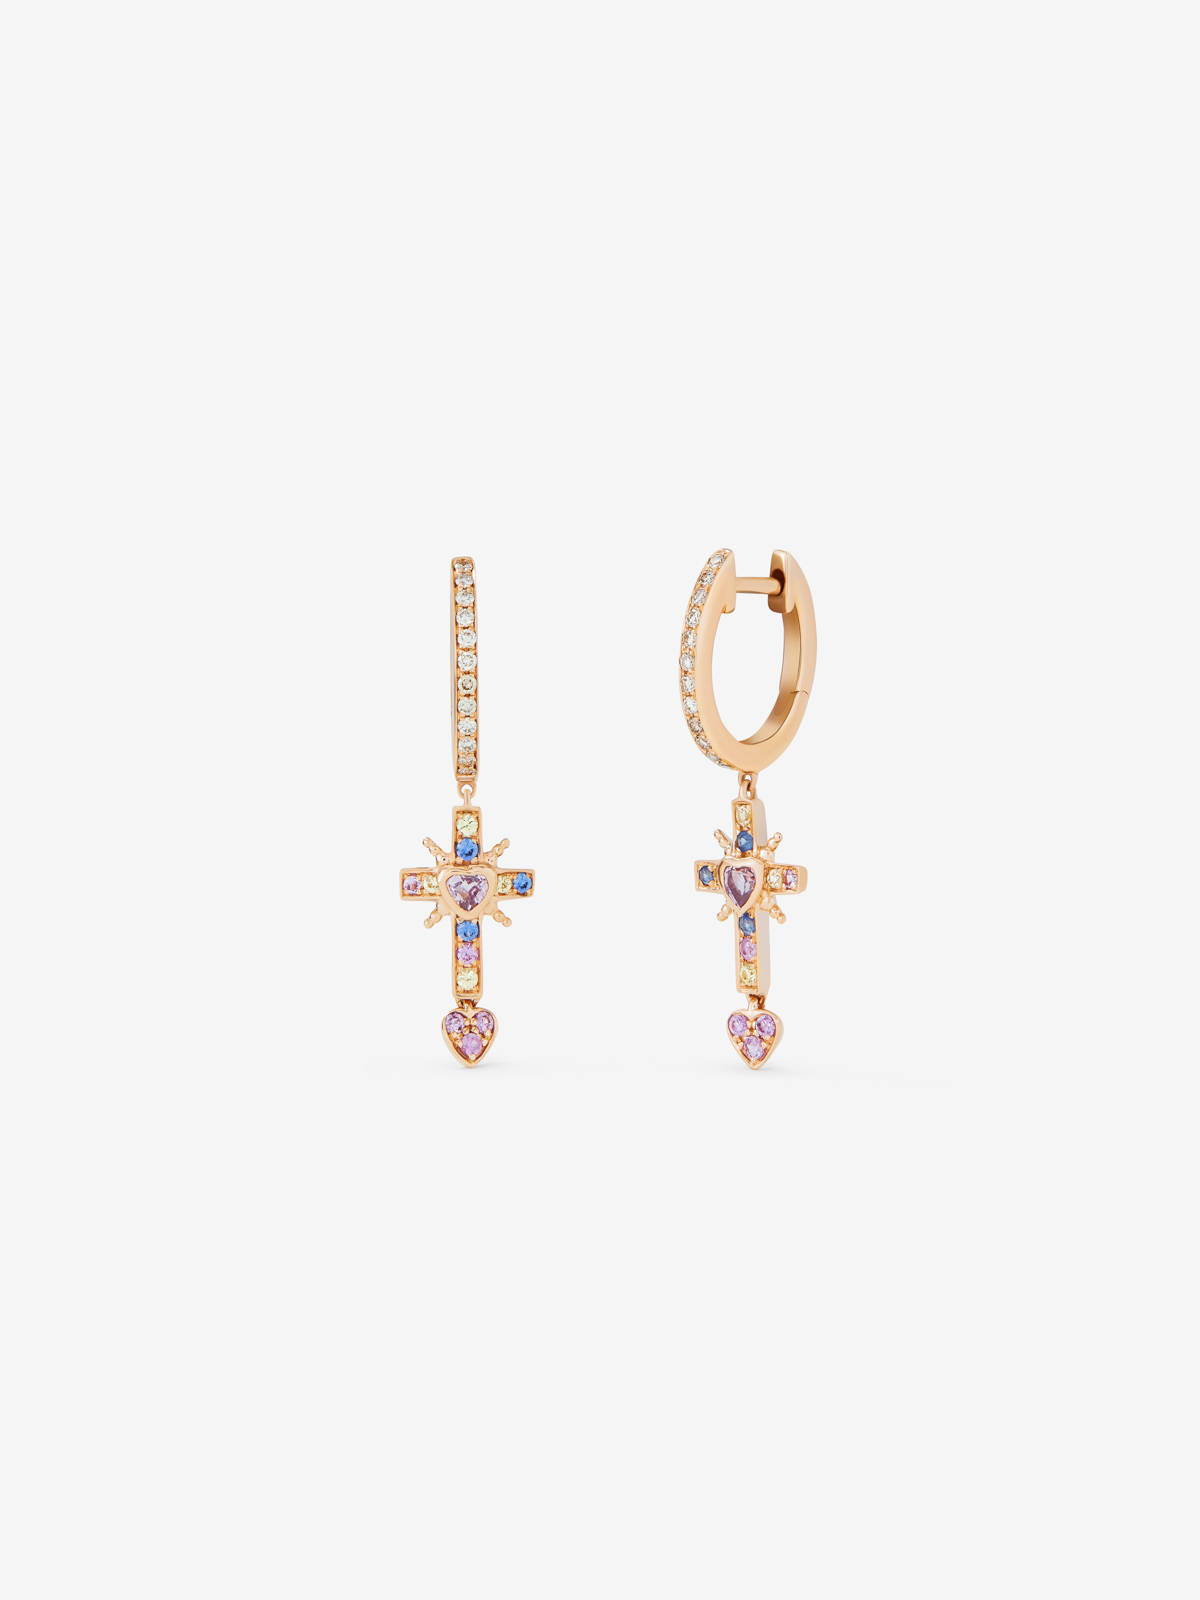 18K Rose Gold Hoop Earrings with Sapphire and Diamond Pendant